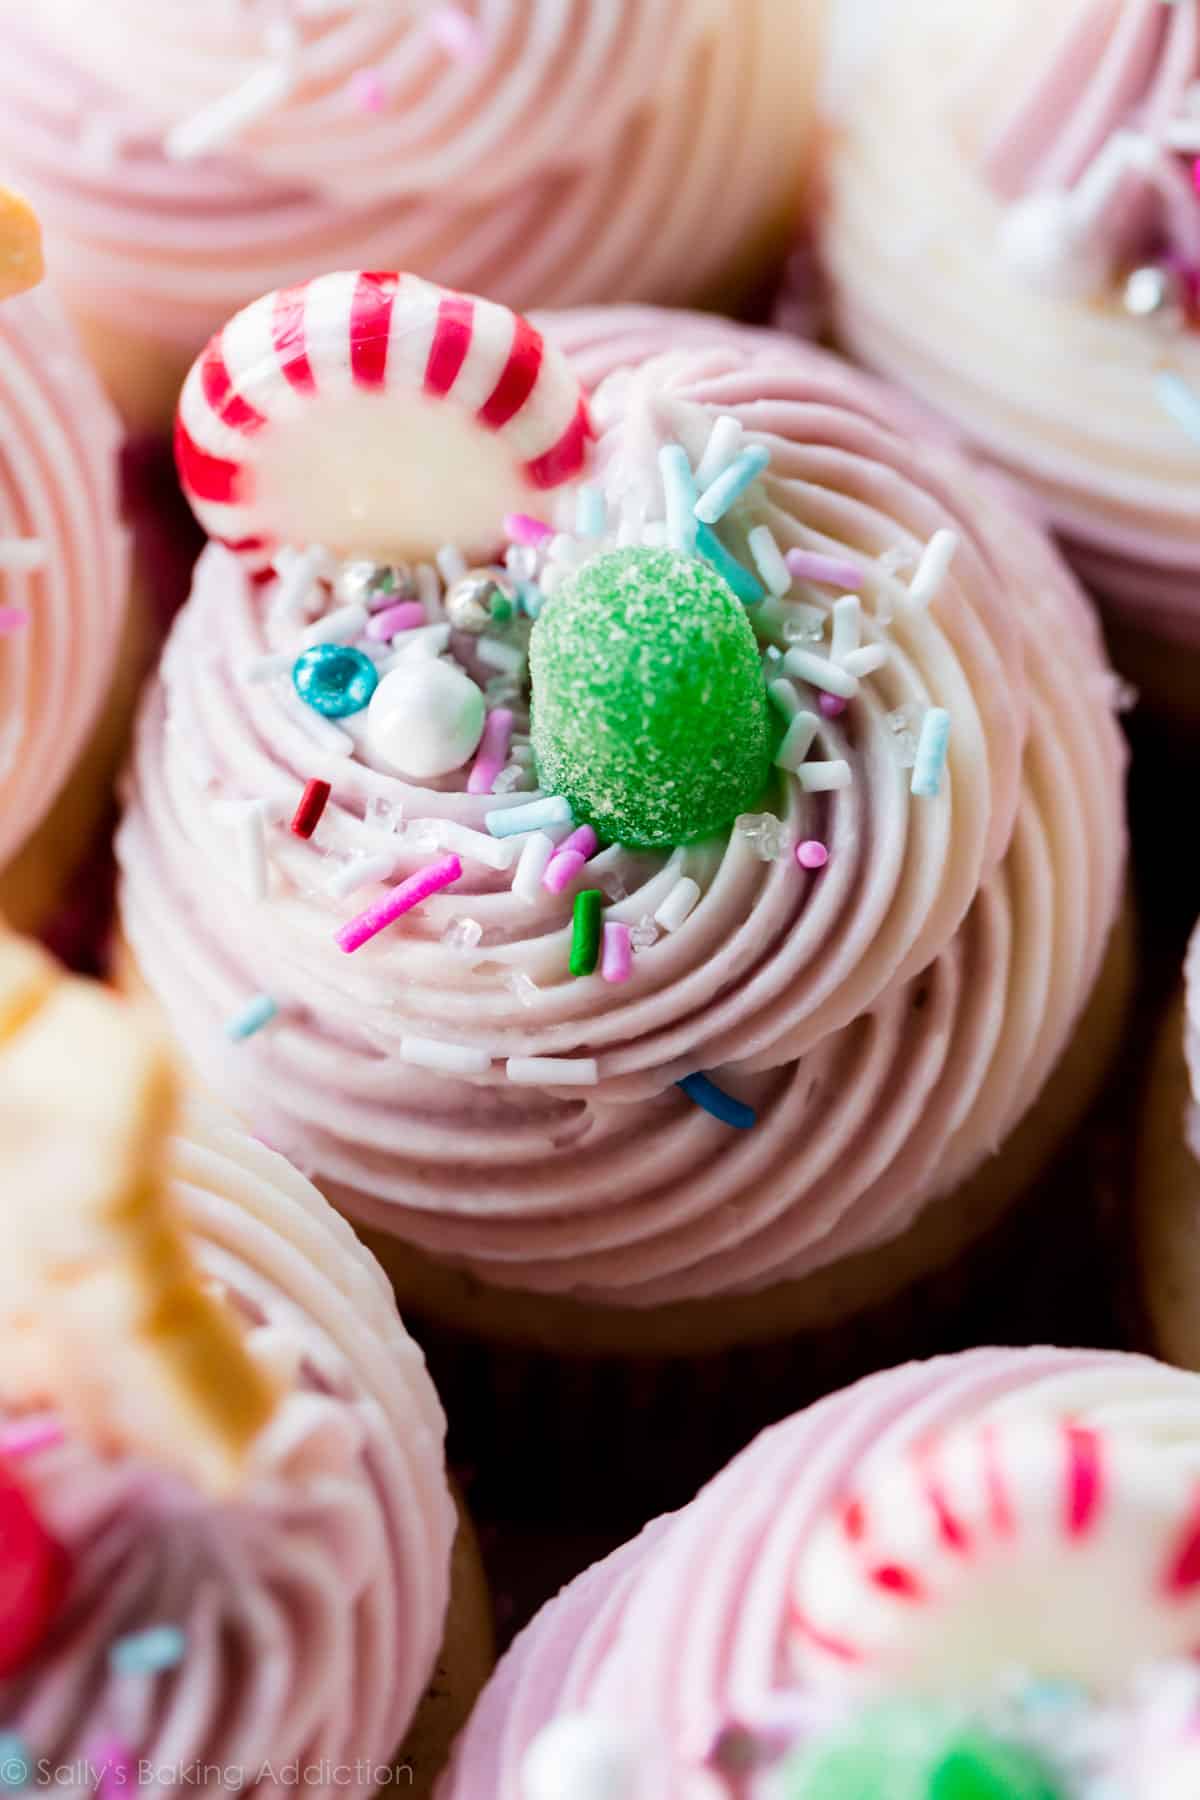 cupcakes with swirls of purple vanilla almond buttercream and candies and sprinkles